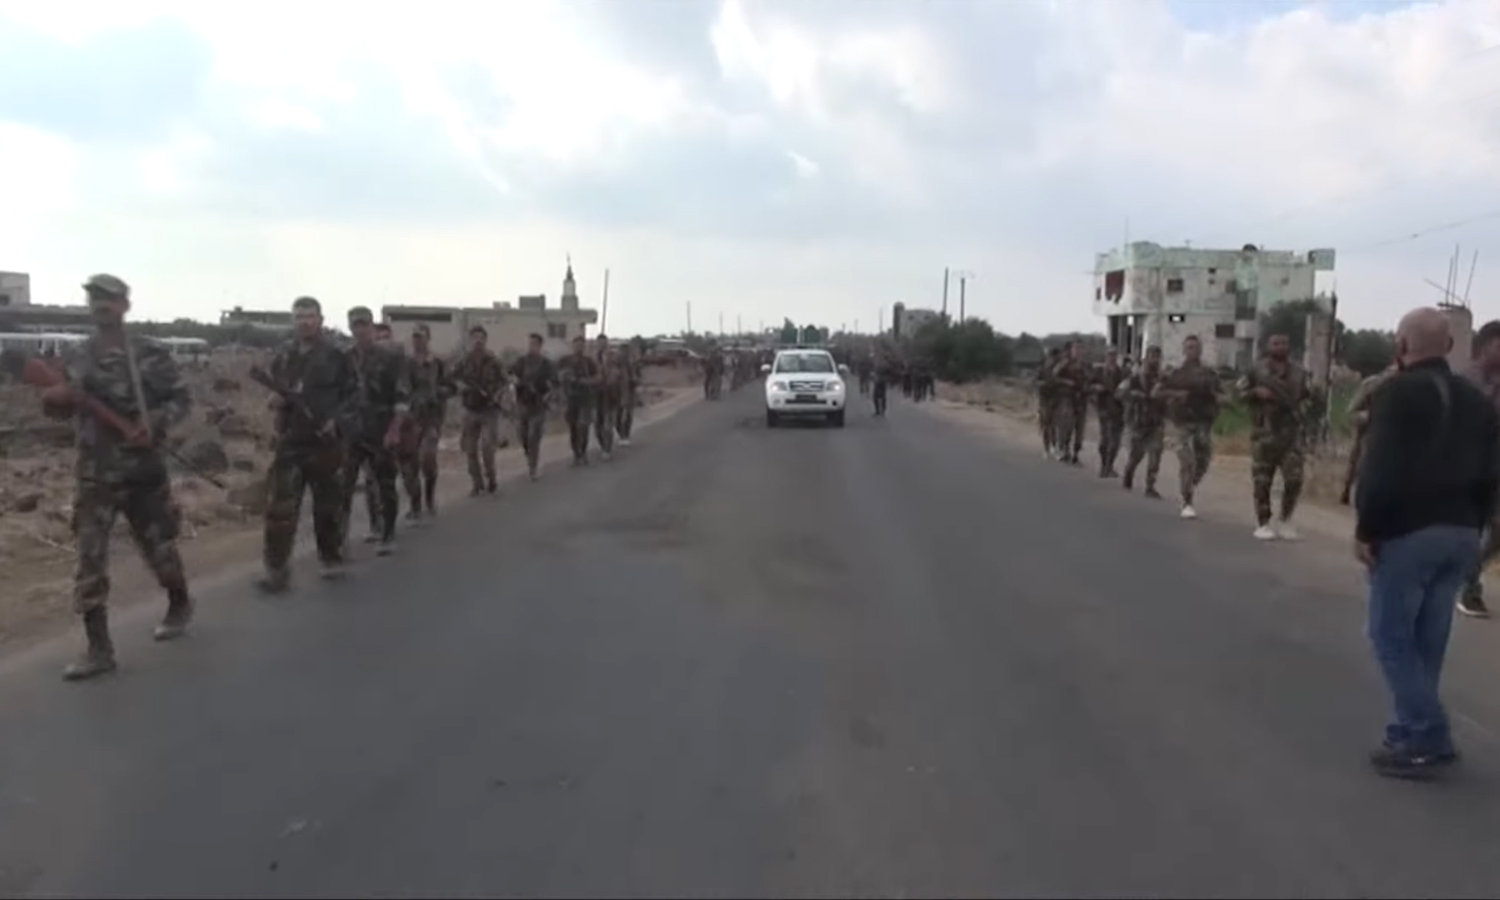 Syrian regime army soldiers deployed in the city of Jasim in the southern Daraa governorate according to the security settlement agreement - 4 October 2021 (Sputnik)